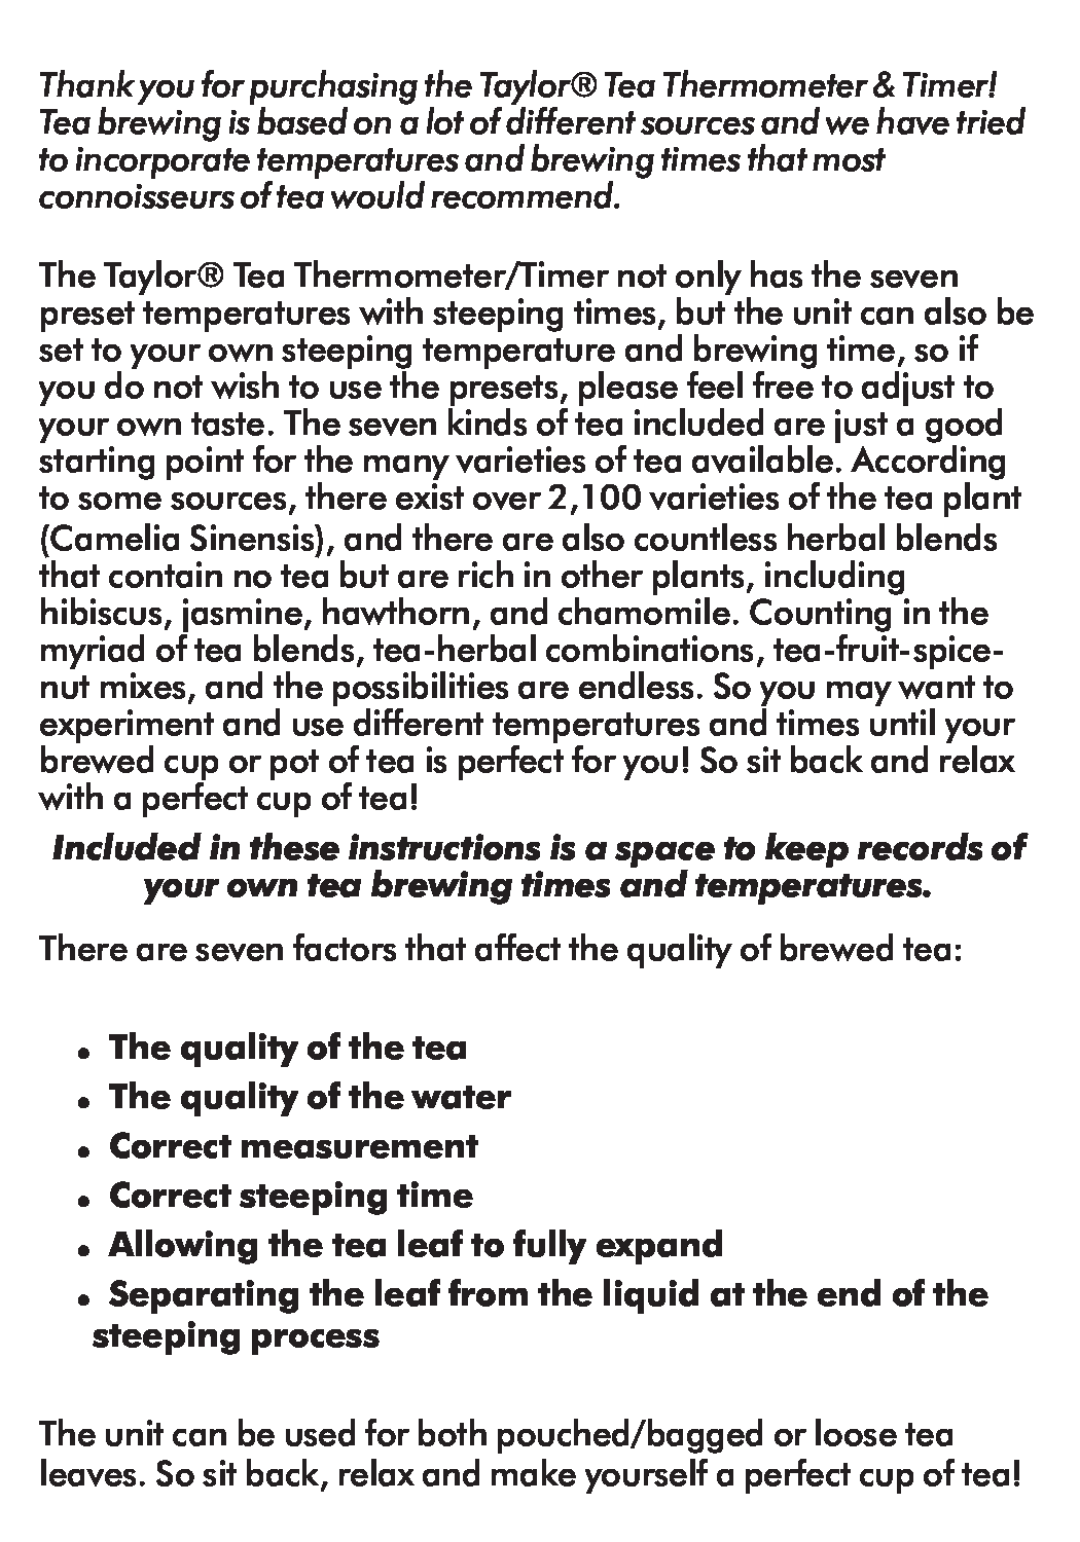 Taylor 516 Included in these instructions is a space to keep records of, your own tea brewing times and temperatures 